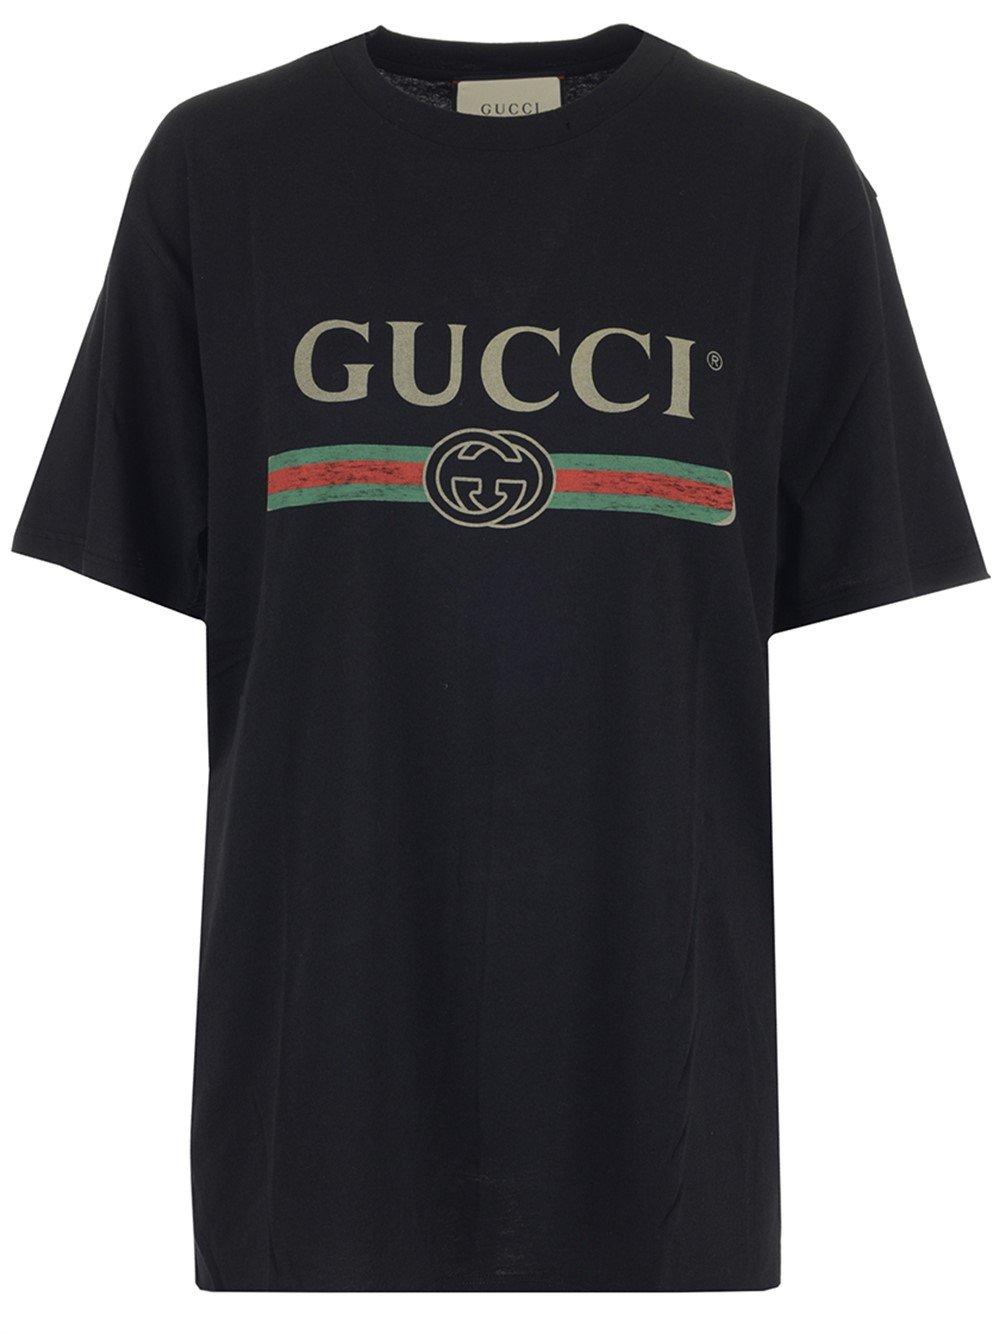 Gucci Cotton T-shirt in Black - Save 40% - Lyst